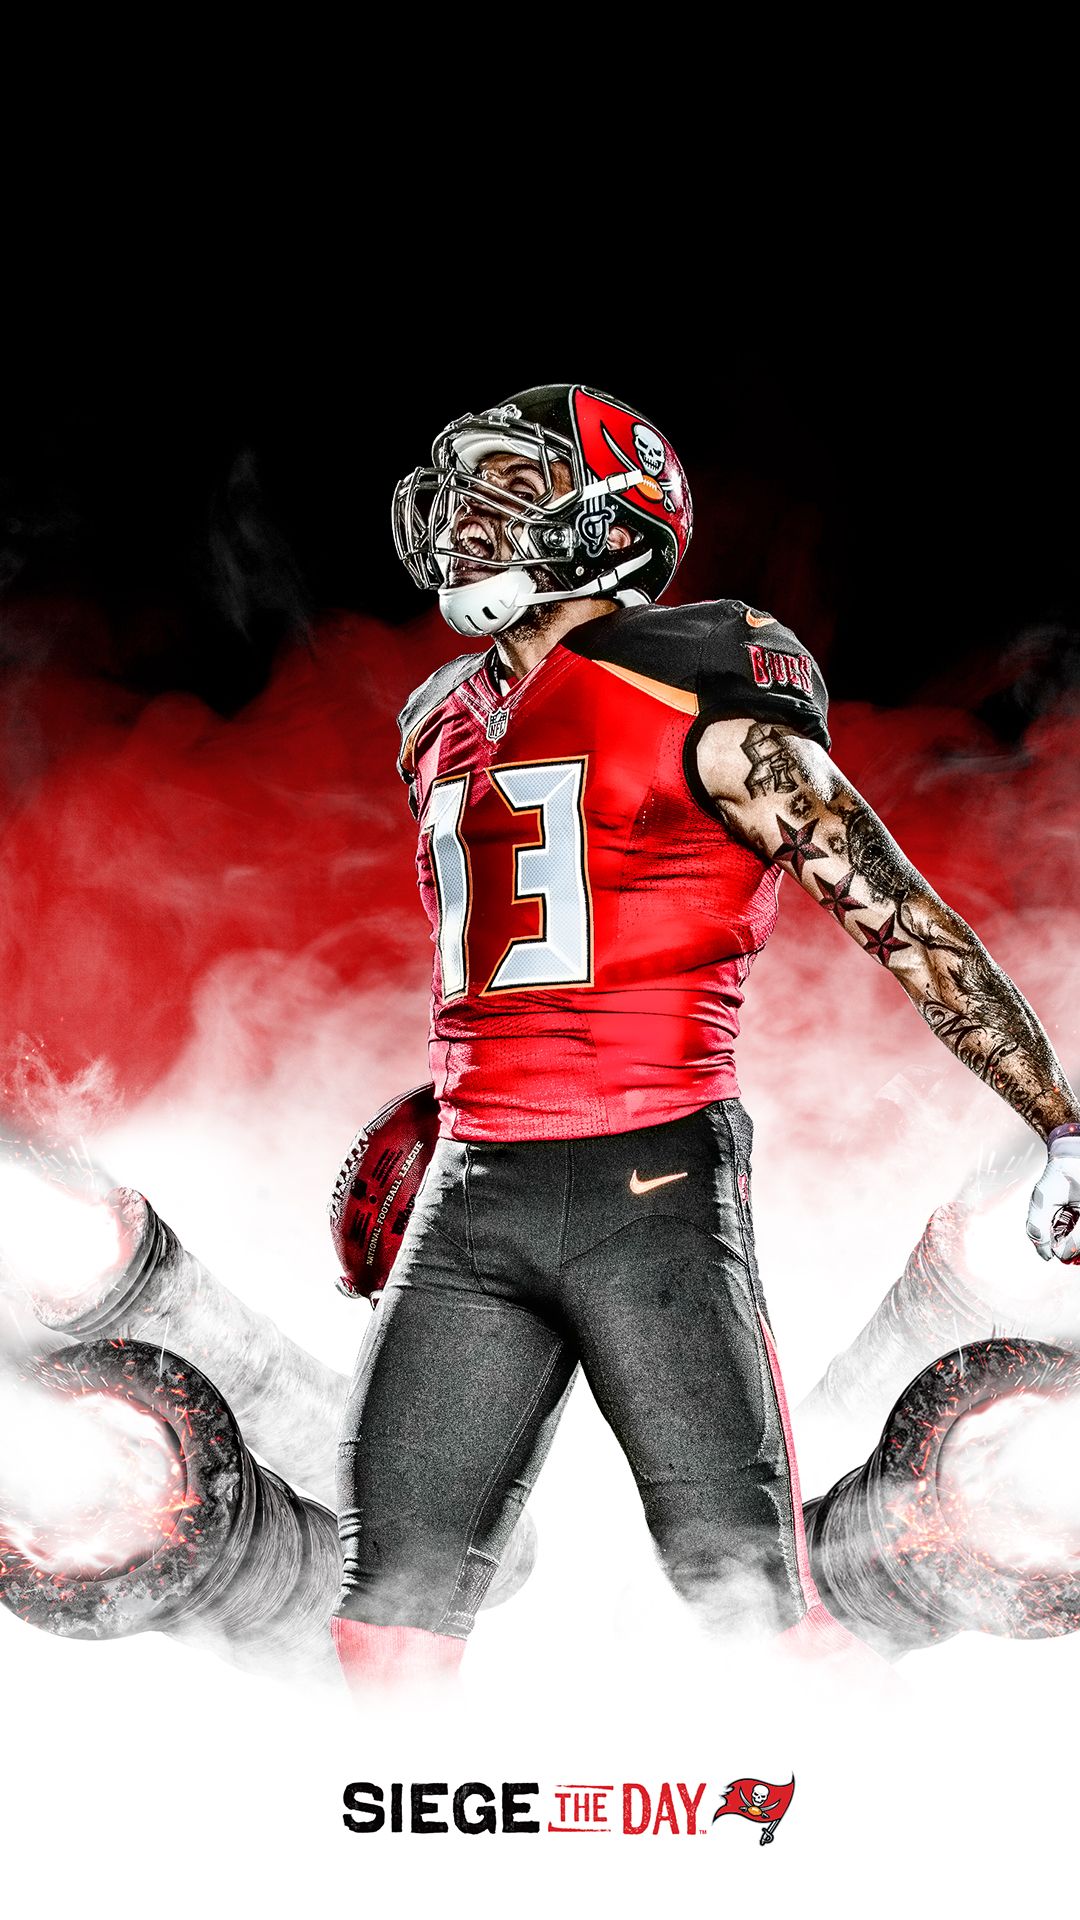 Download Faithful Tampa Bay Buccaneers Fans show off their team spirit with  their iPhones Wallpaper  Wallpaperscom